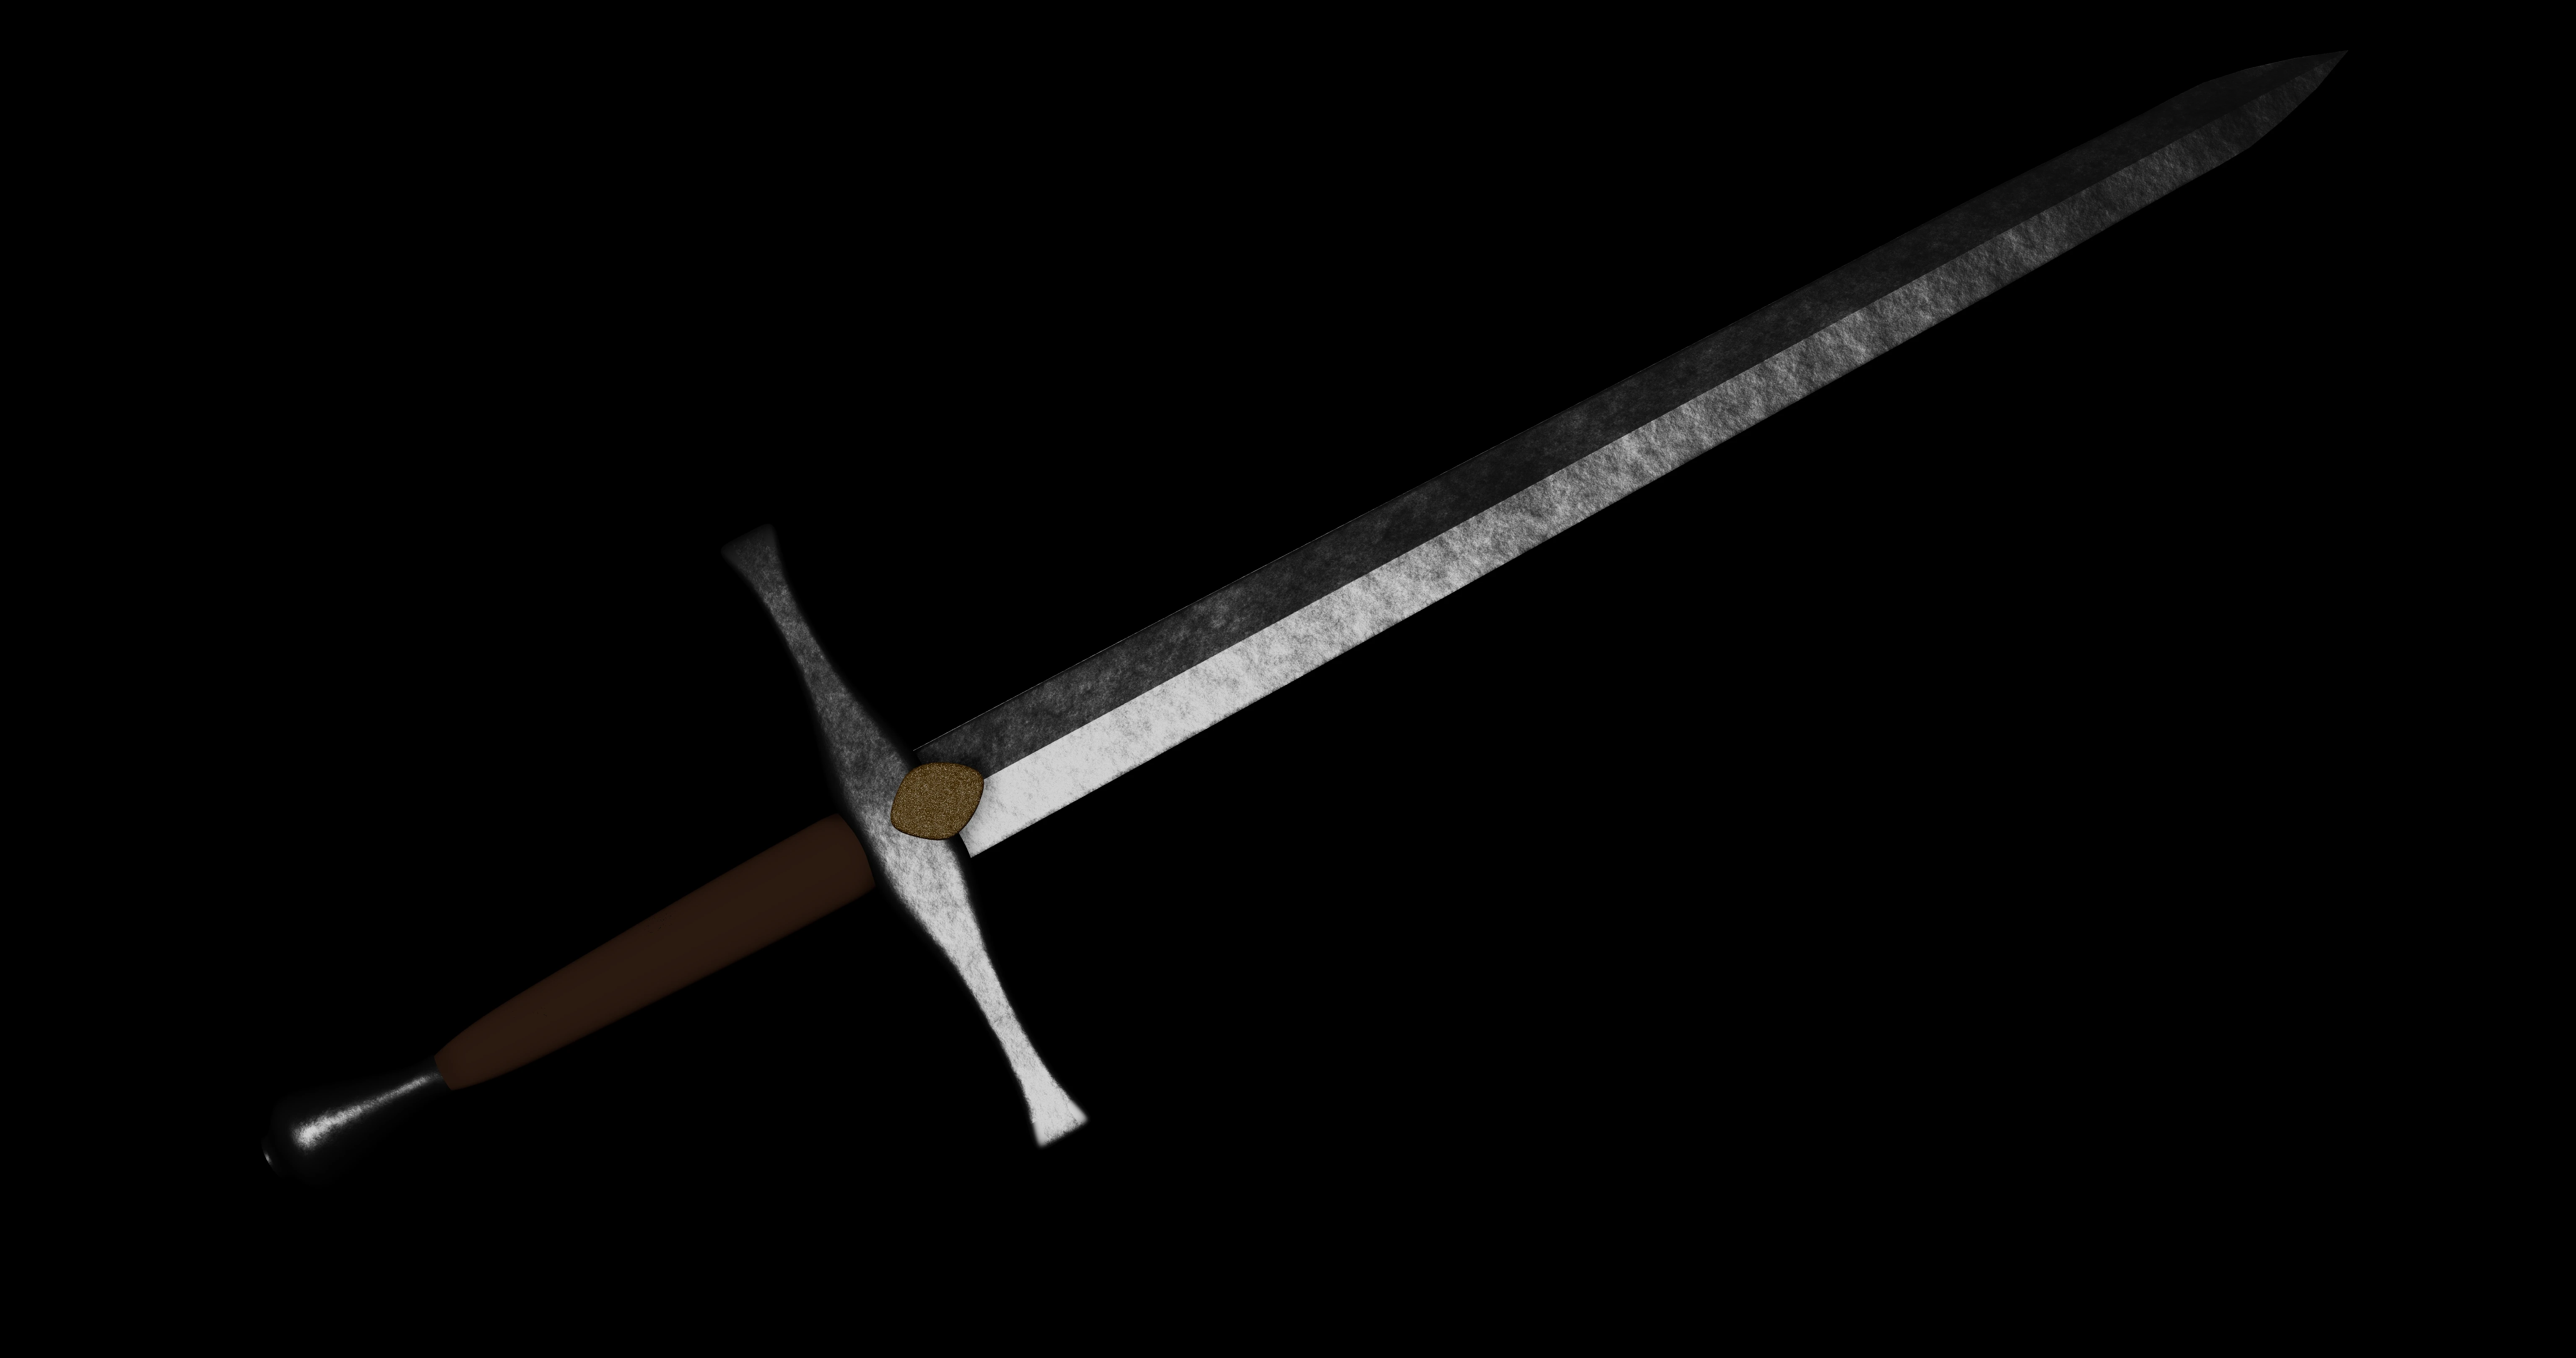 First attempt at creating a sword